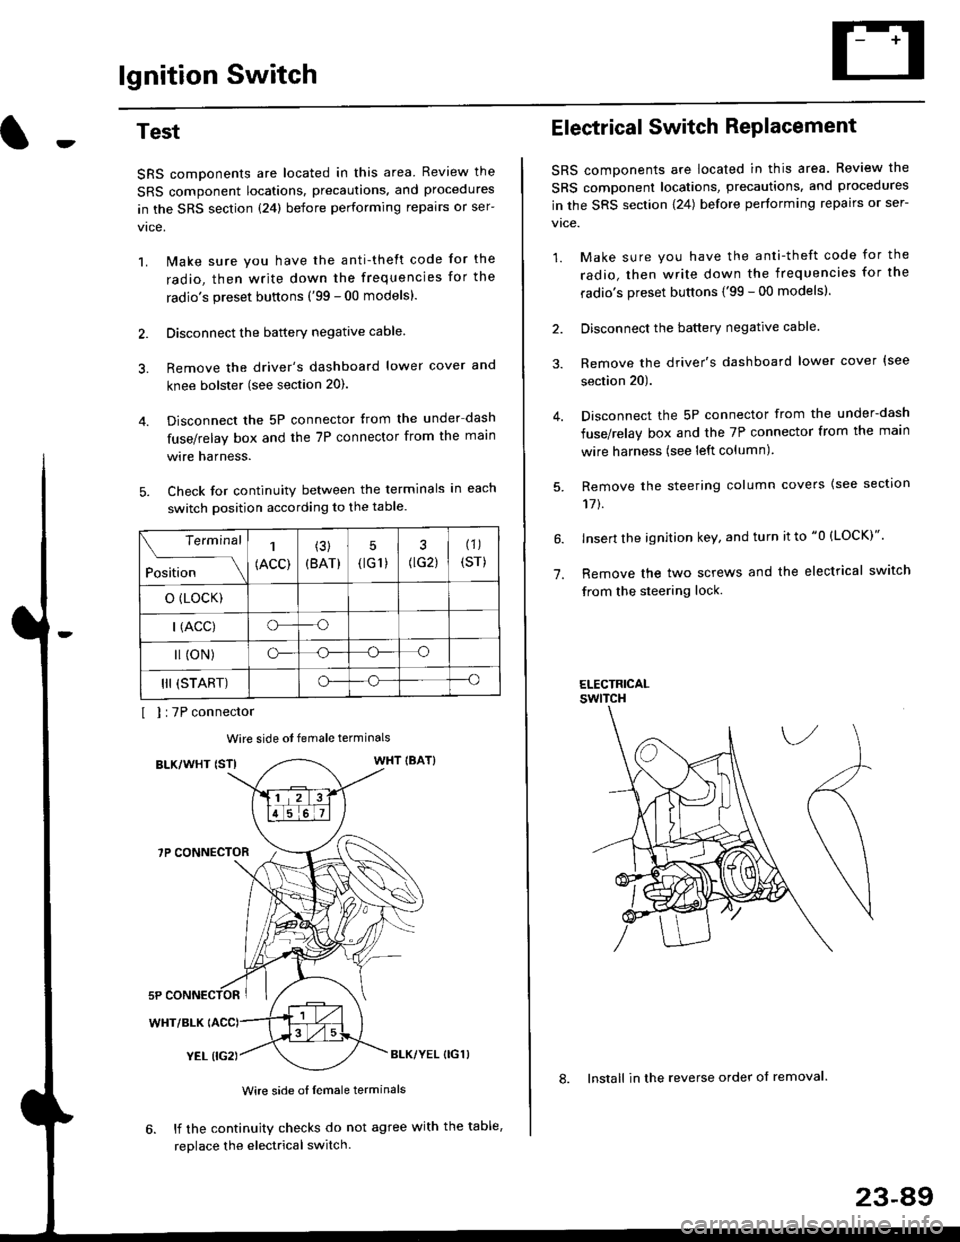 HONDA CIVIC 2000 6.G Workshop Manual lgnition Switch
4.
Test
SRS components are located in this area Review the
SRS component locations. precautions. and procedures
in the SRS section {24} before performing repairs or ser-
1. i/ake sure 